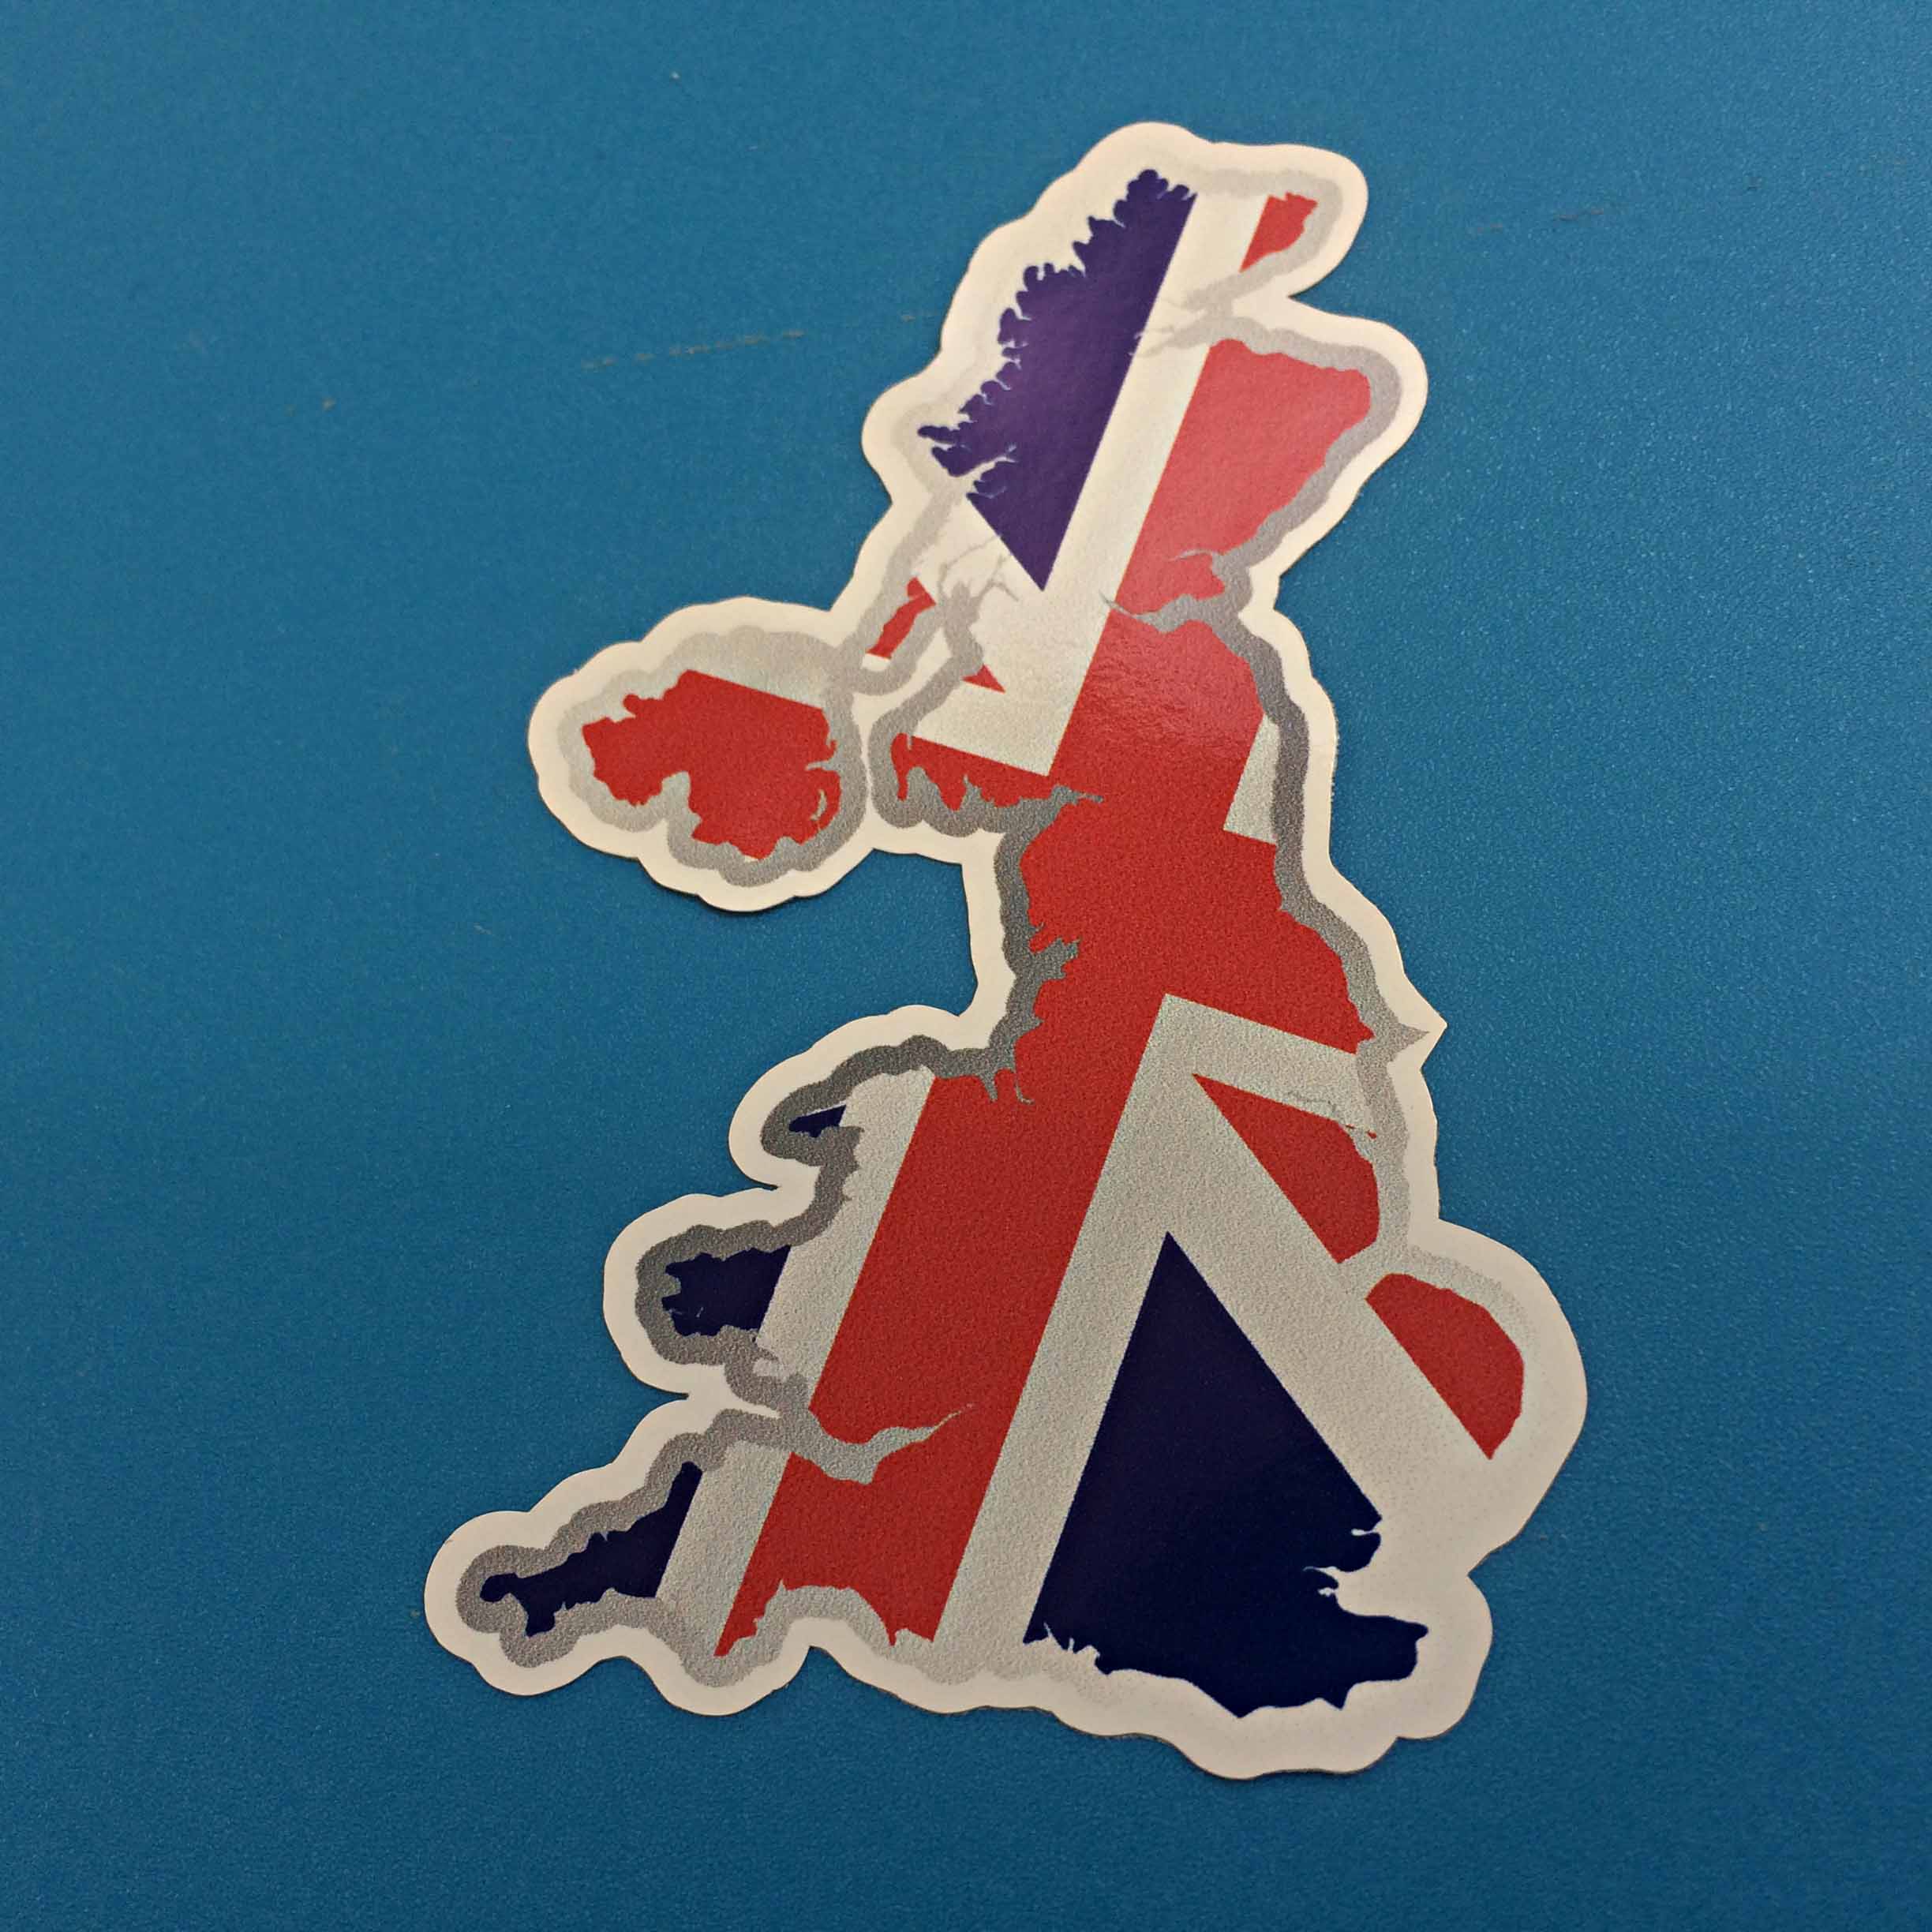 ENGLAND UK FLAG AND MAP STICKER. A flag and map of the UK. The red, white and blue Union Jack.